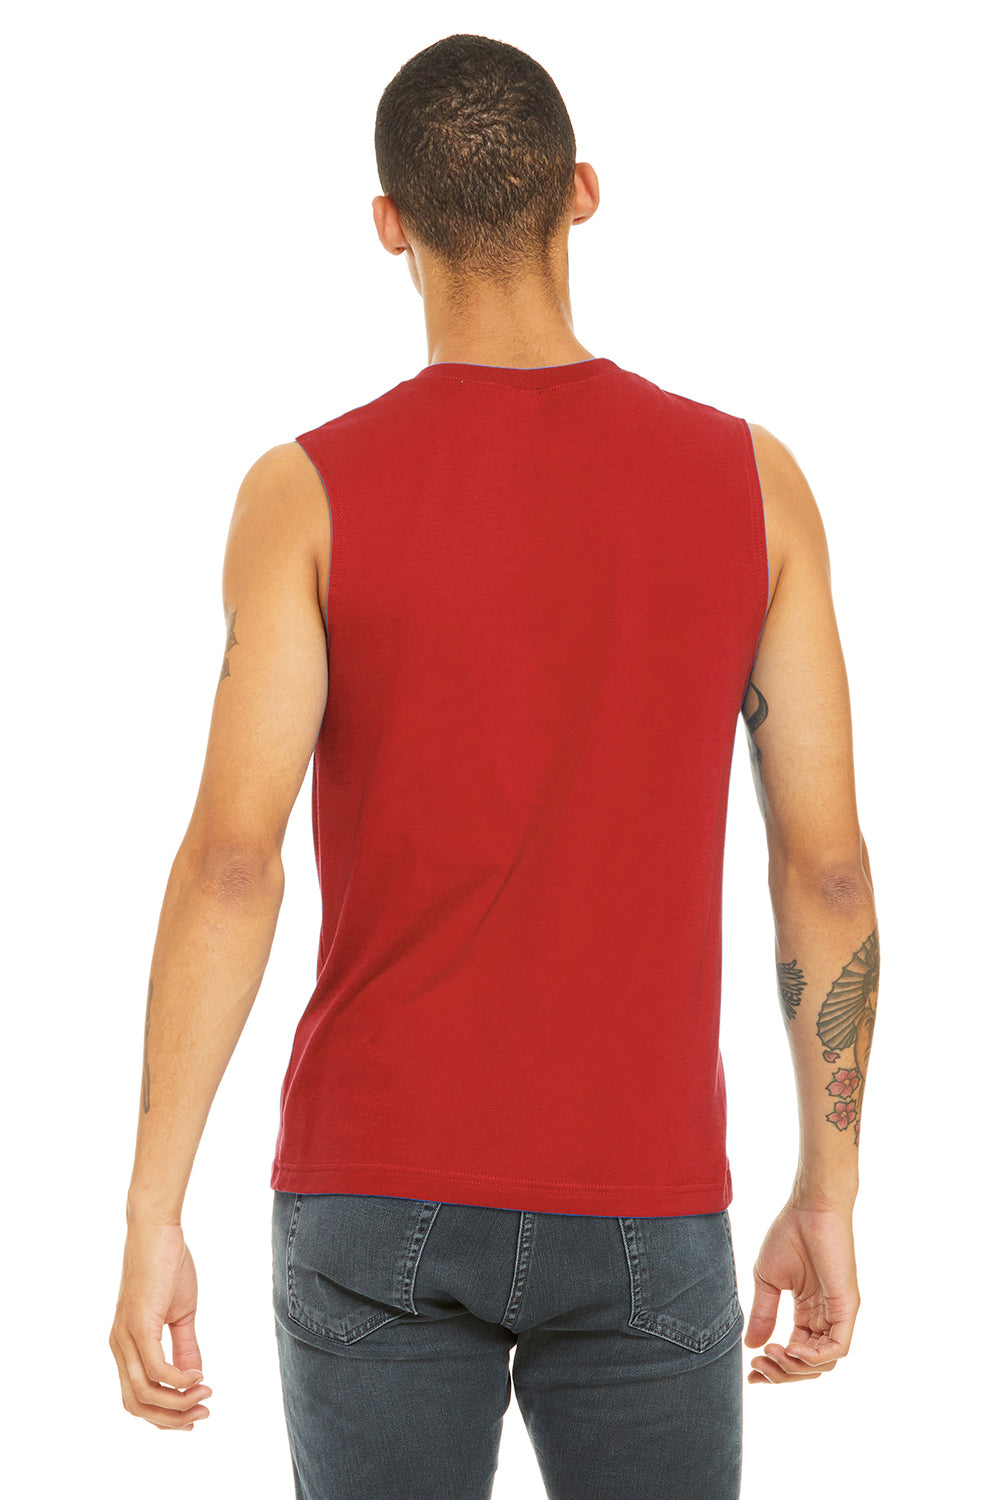 Bella + Canvas 3483 Mens Jersey Muscle Tank Top Red Back